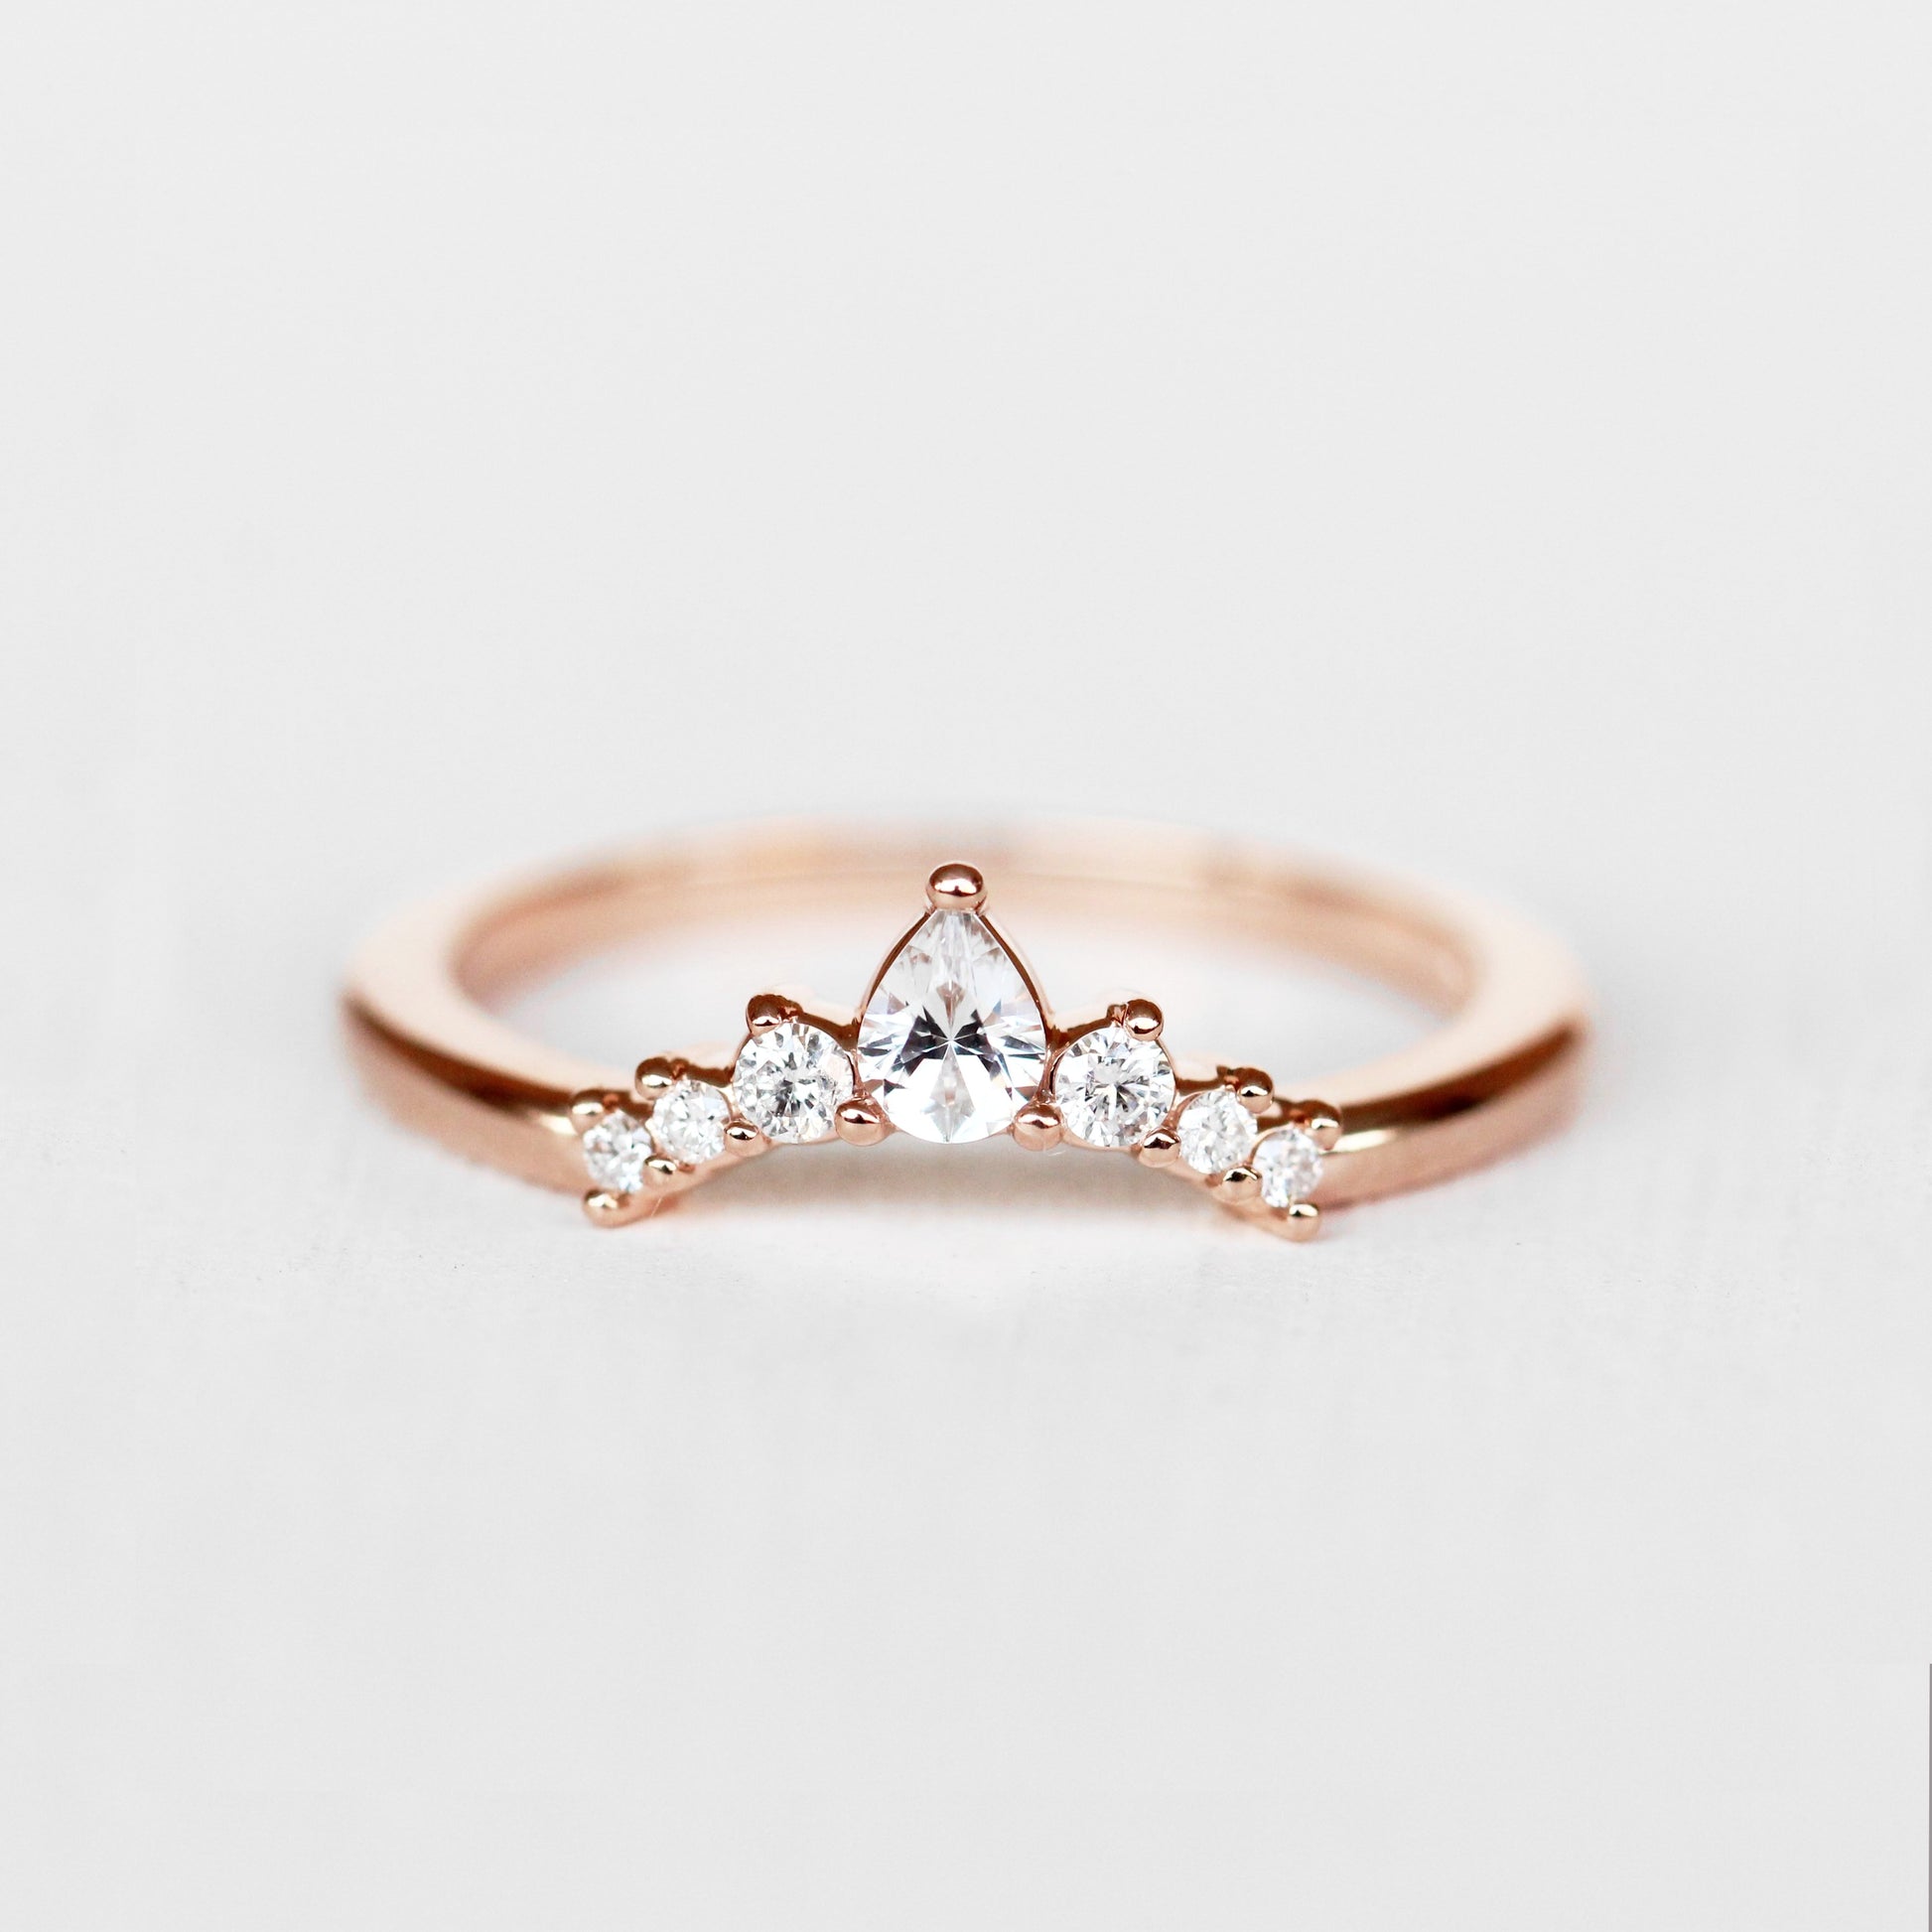 Moira - Contoured Diamond Wedding Stacking Band - made to order - Midwinter Co. Alternative Bridal Rings and Modern Fine Jewelry